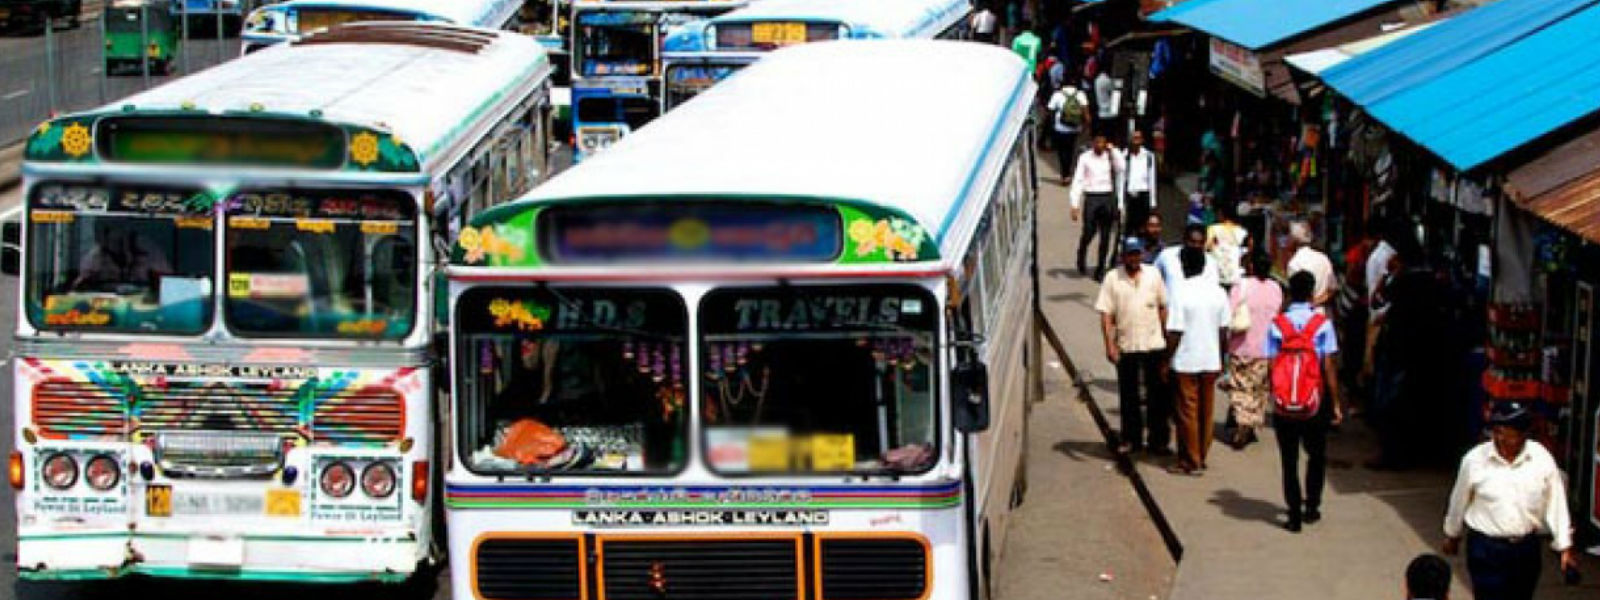 120 buses from Horana to Colombo on strike